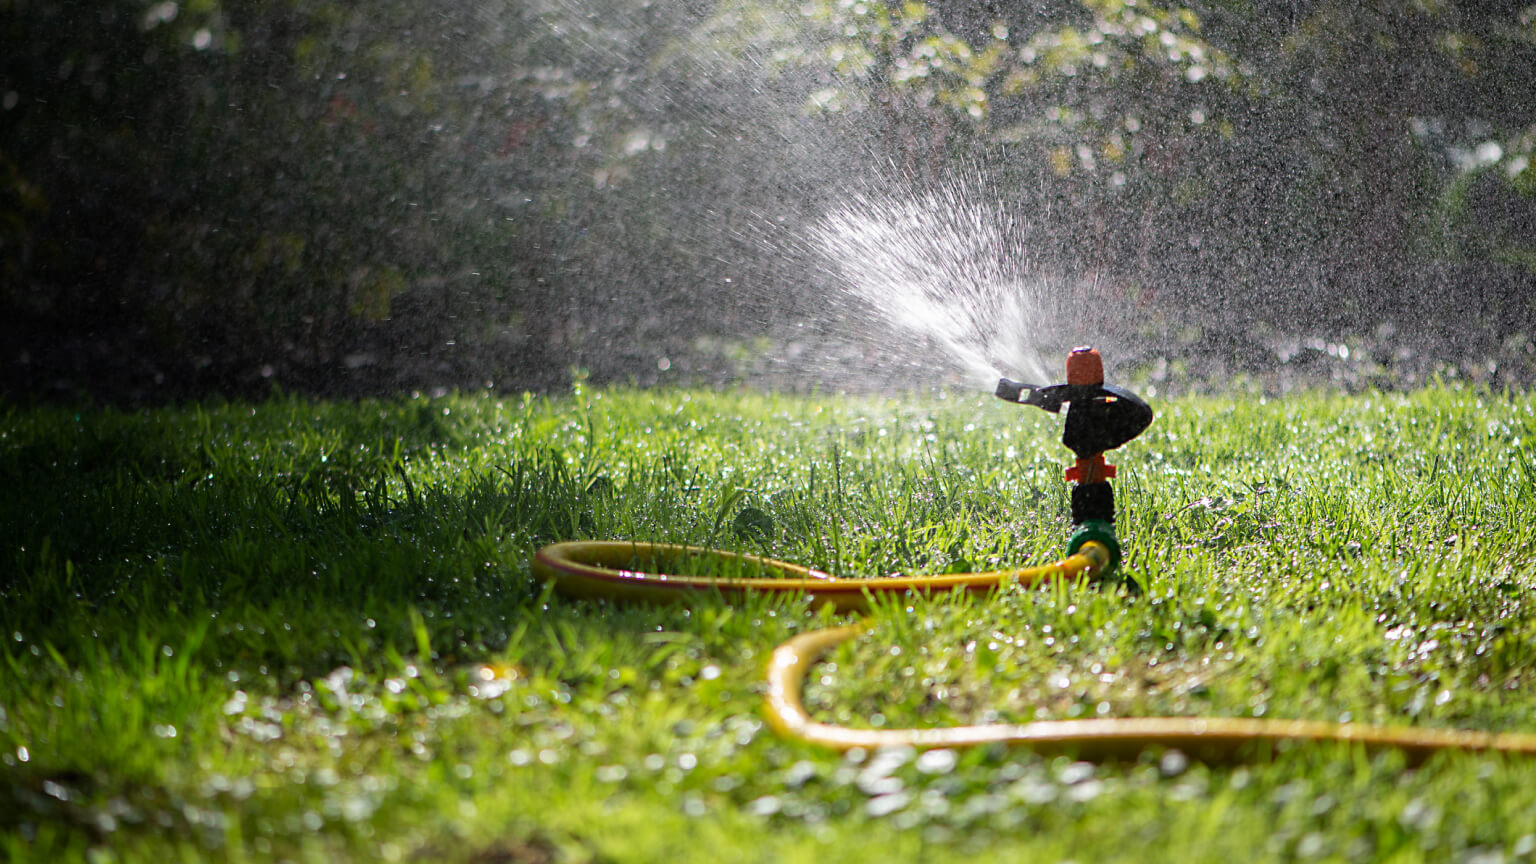 Automatic Sprinkler System Watering The Lawn